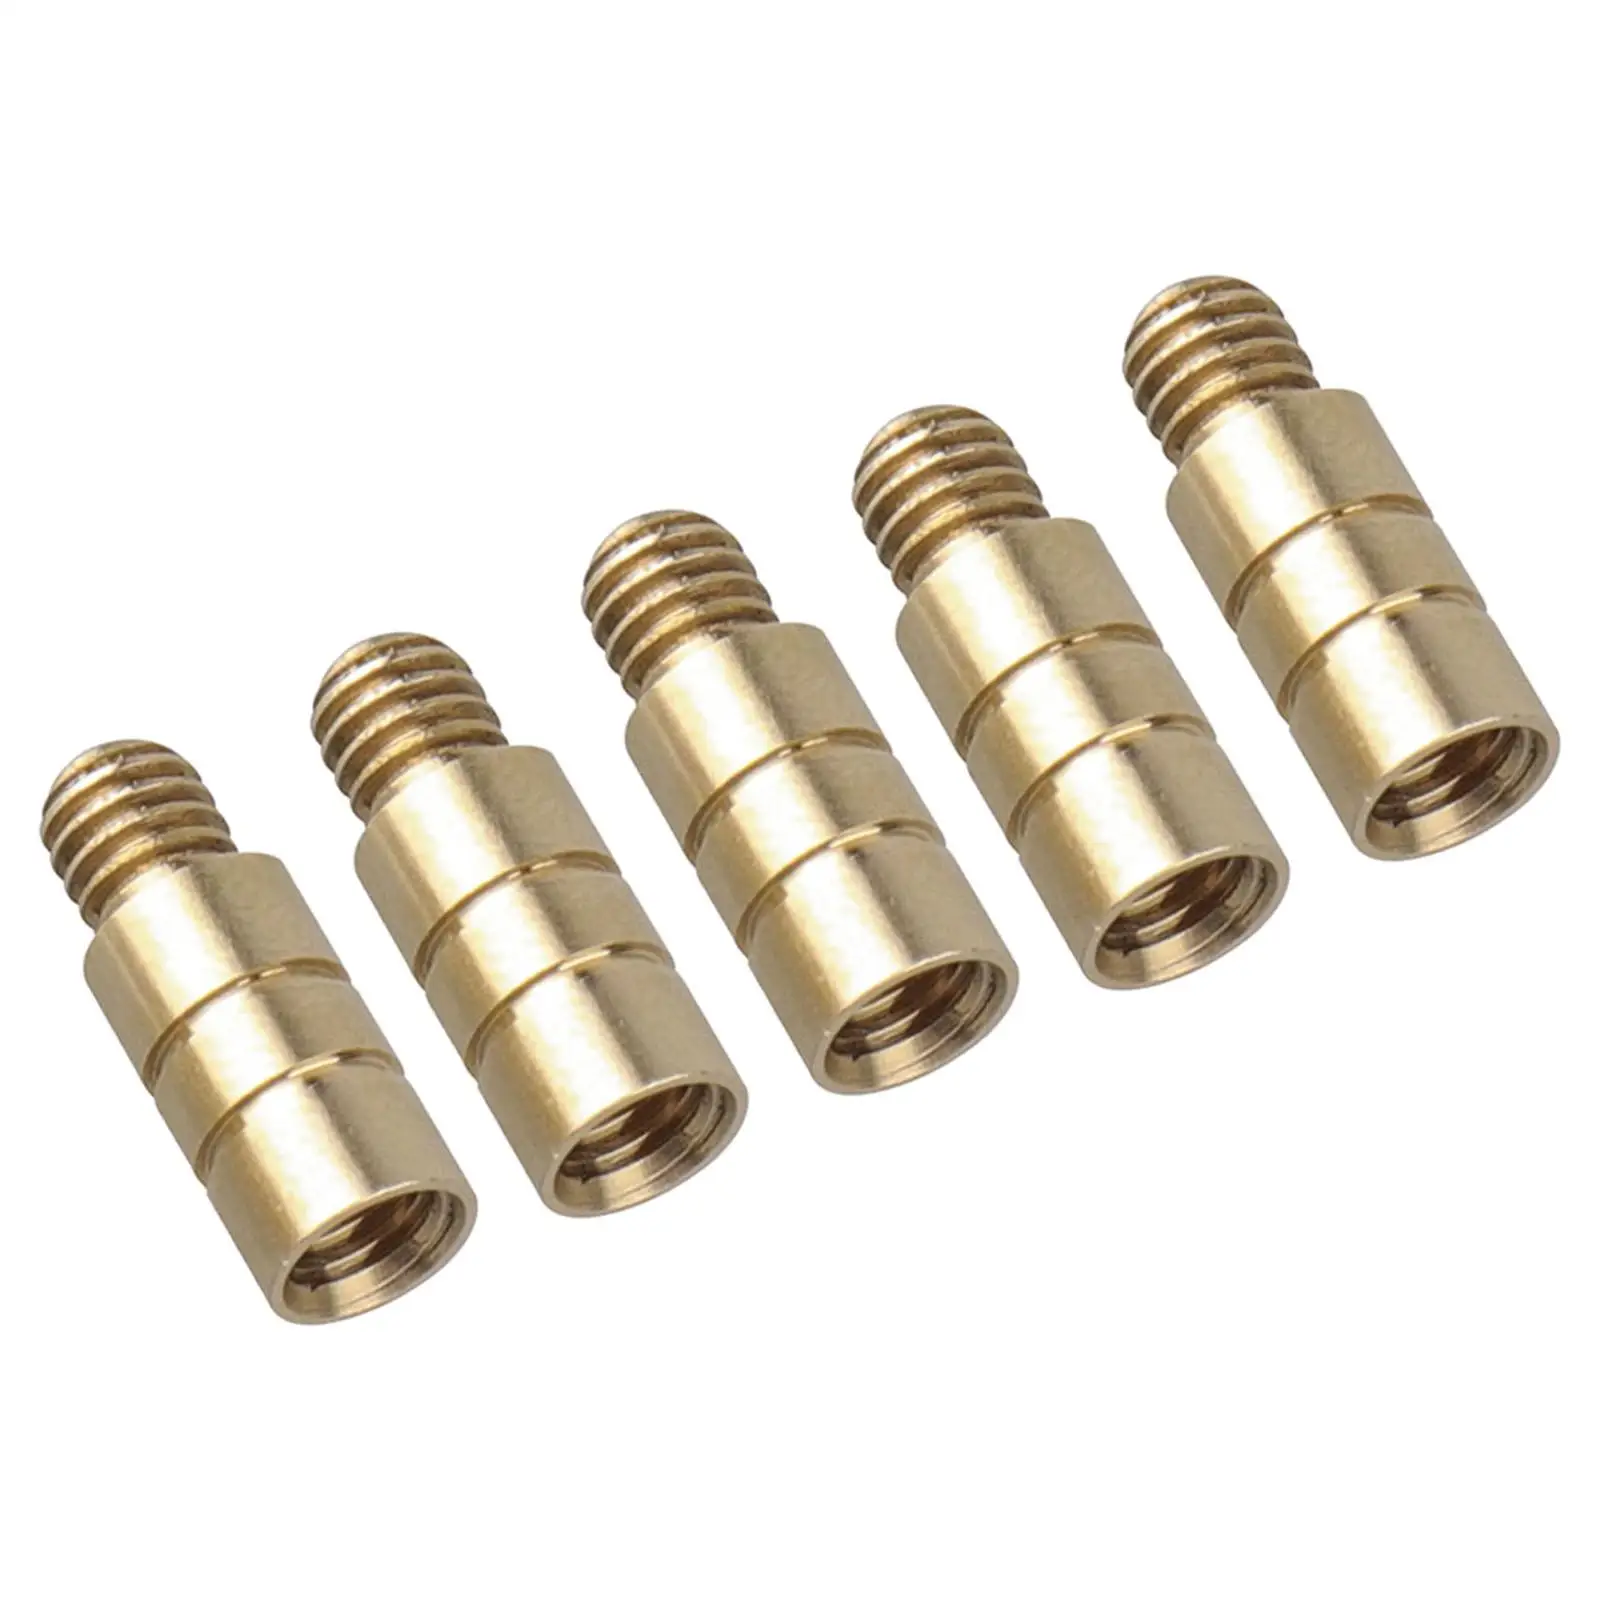 5pcs Brass Darts Counterweight 2g, 2BA Darts Weight Tool Accessories For Soft and Steel Darts